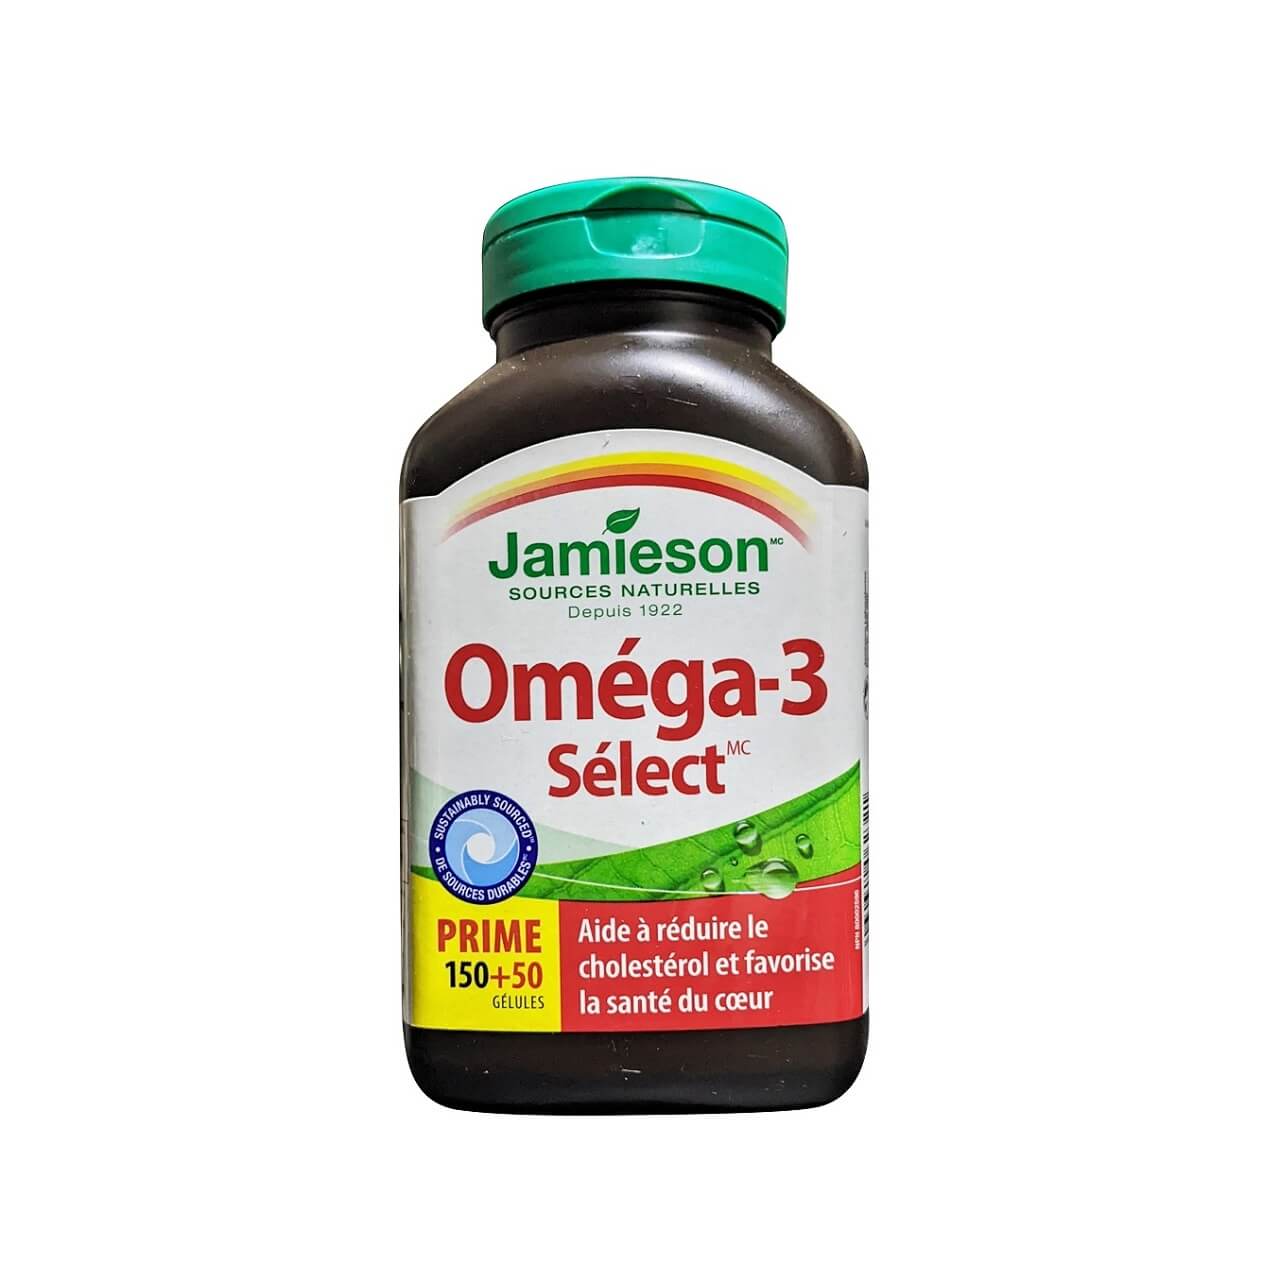 Product label for Jamieson Omega-3 Select (50 softgel bonus) (200 softgels) in French